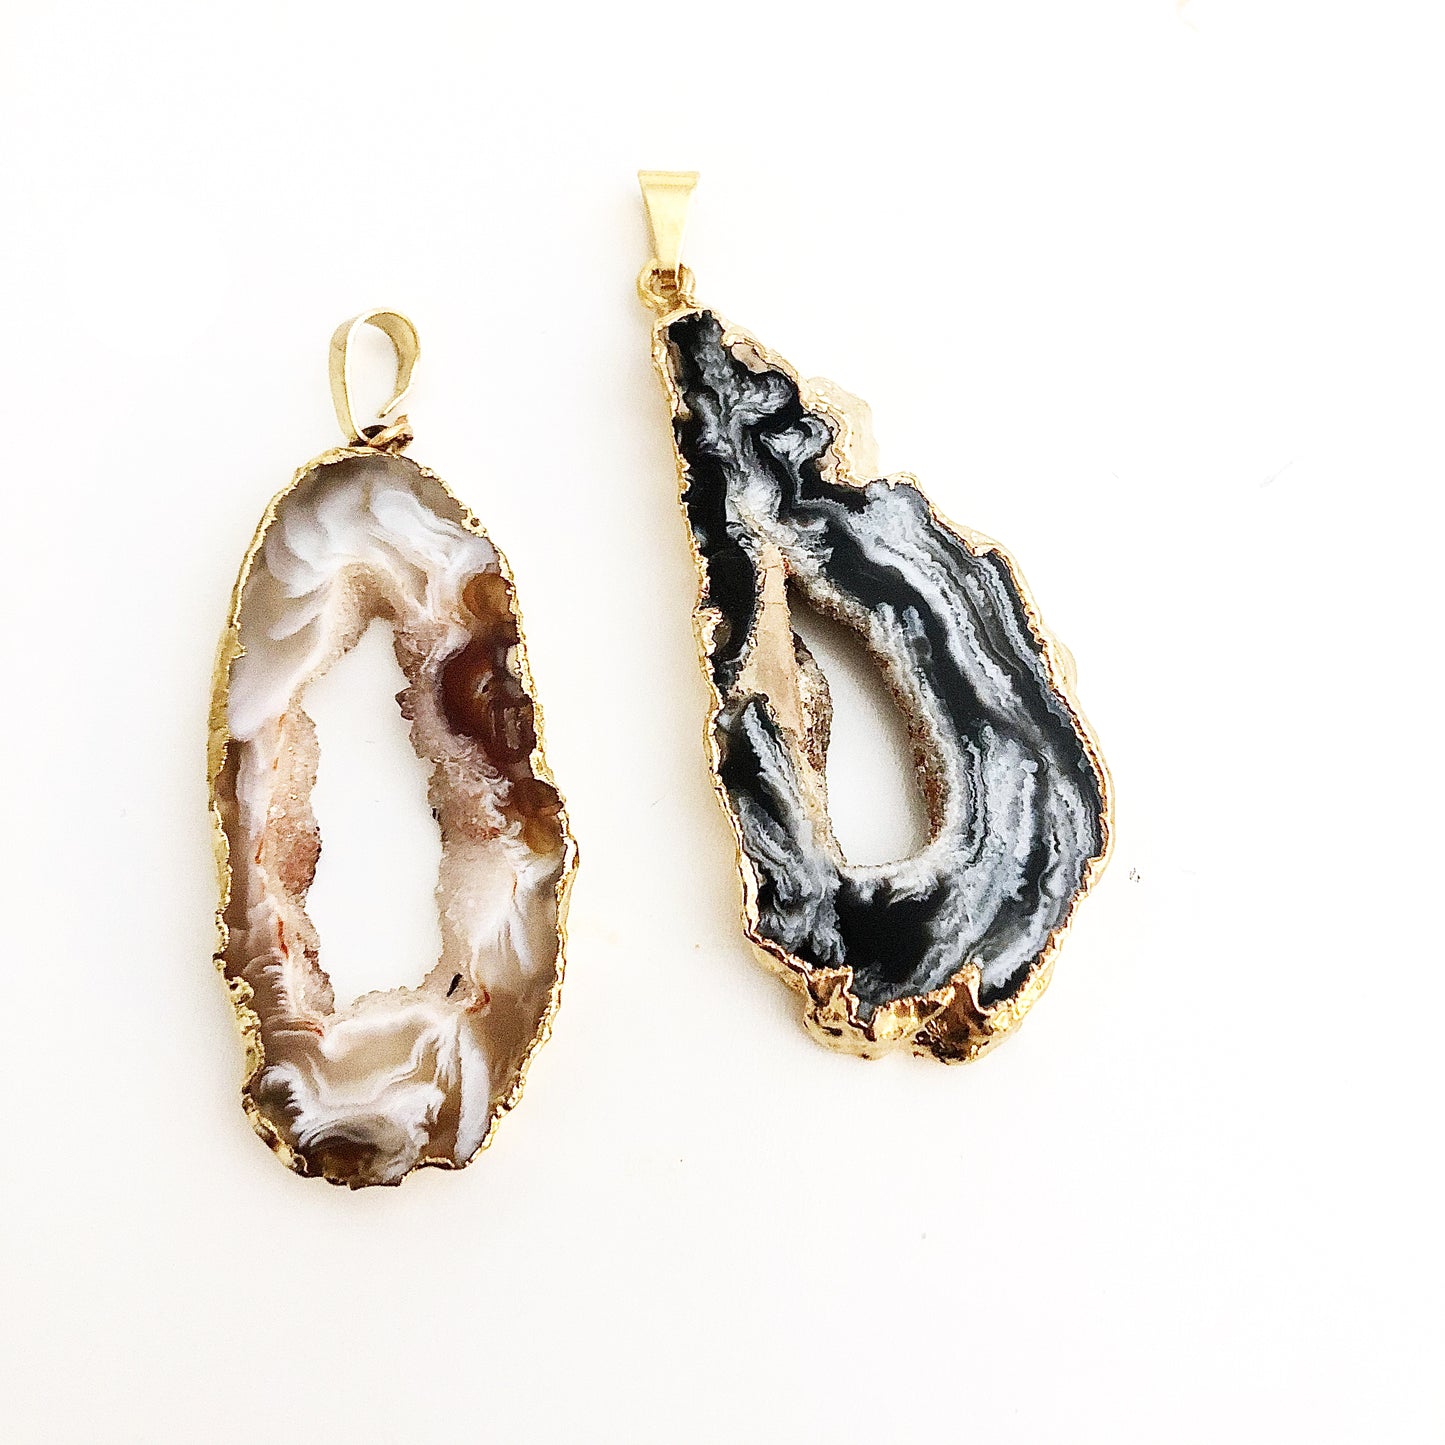 Two Geode Sliced pendants with Gold plated edge